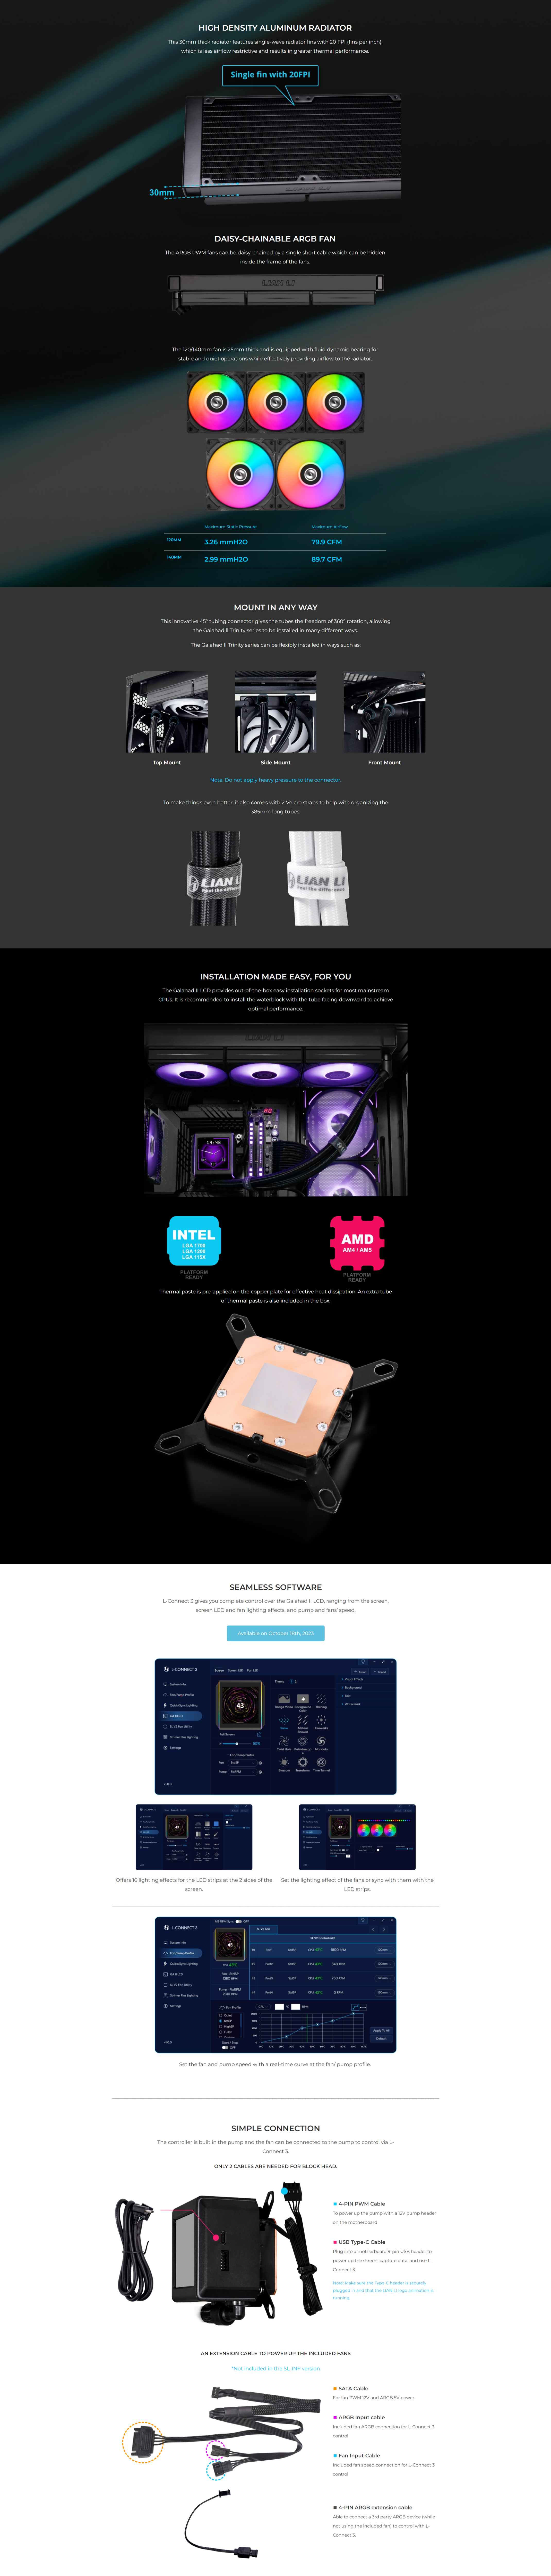 A large marketing image providing additional information about the product Lian Li Galahad II LCD SL-INF 360 RGB 360mm AIO Liquid CPU Cooler - Black  - Additional alt info not provided